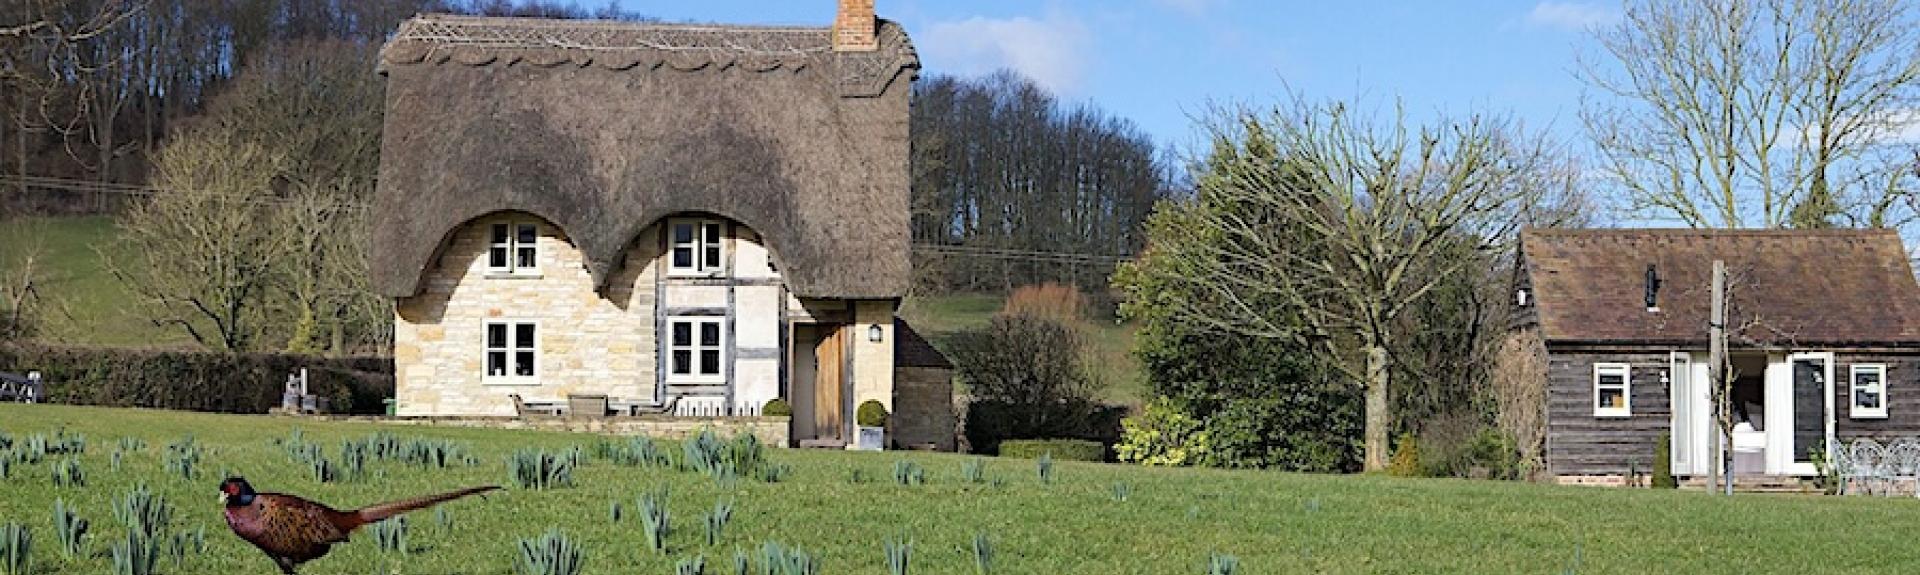 A detached and thatched village cottage overlooks a village green in Worcestershire.